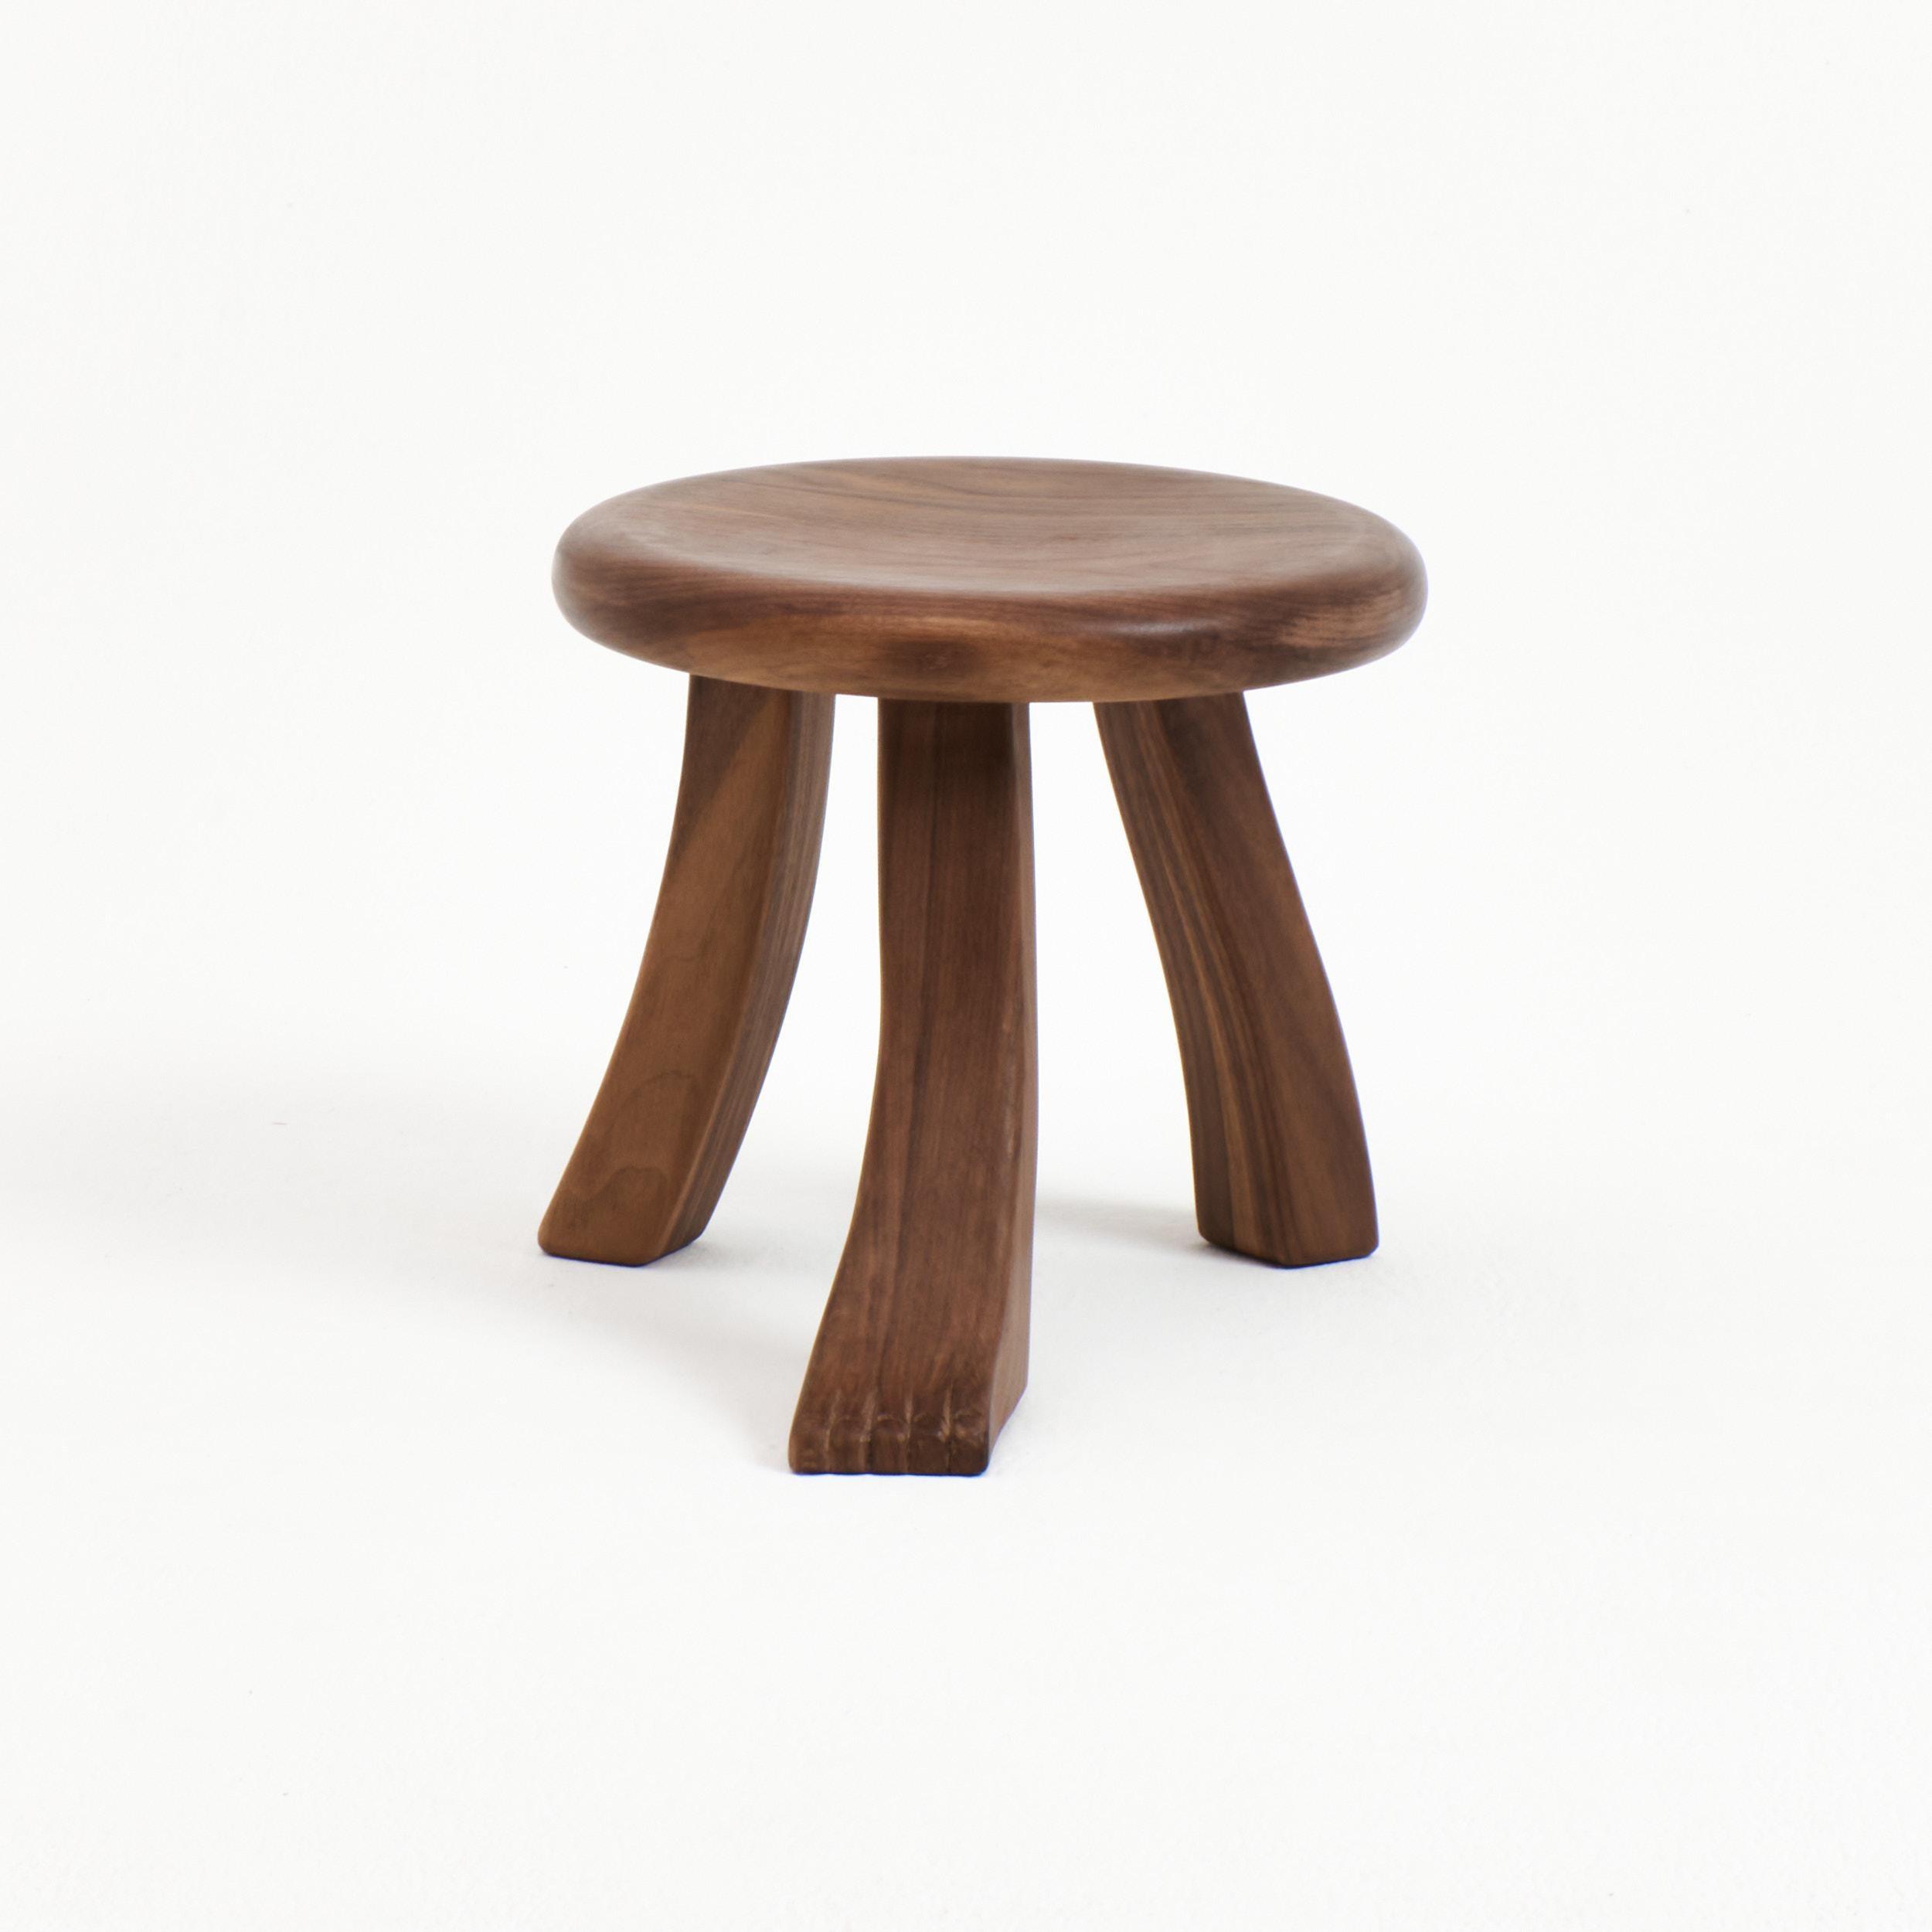 Foot Stool
Designed by Project 213A in 2020

The Foot stool is part of the 